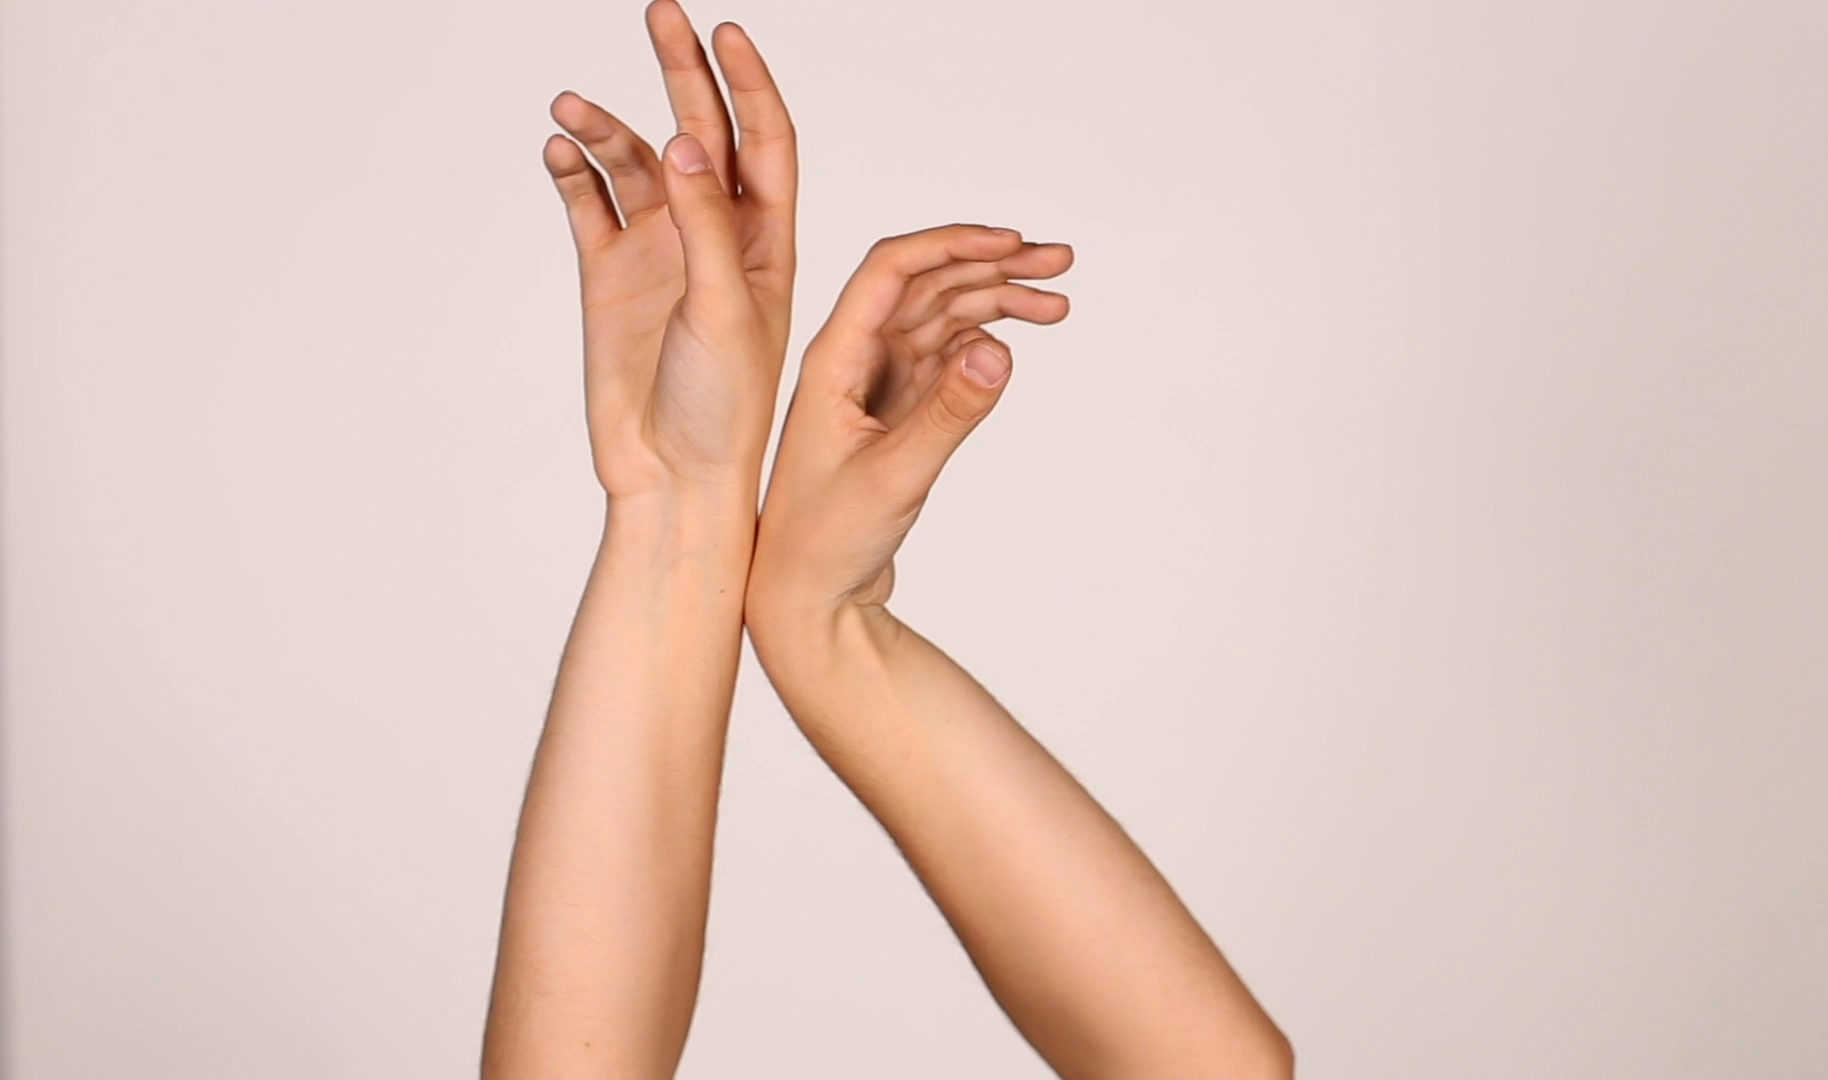 two arms touching at the wrists against a plain background